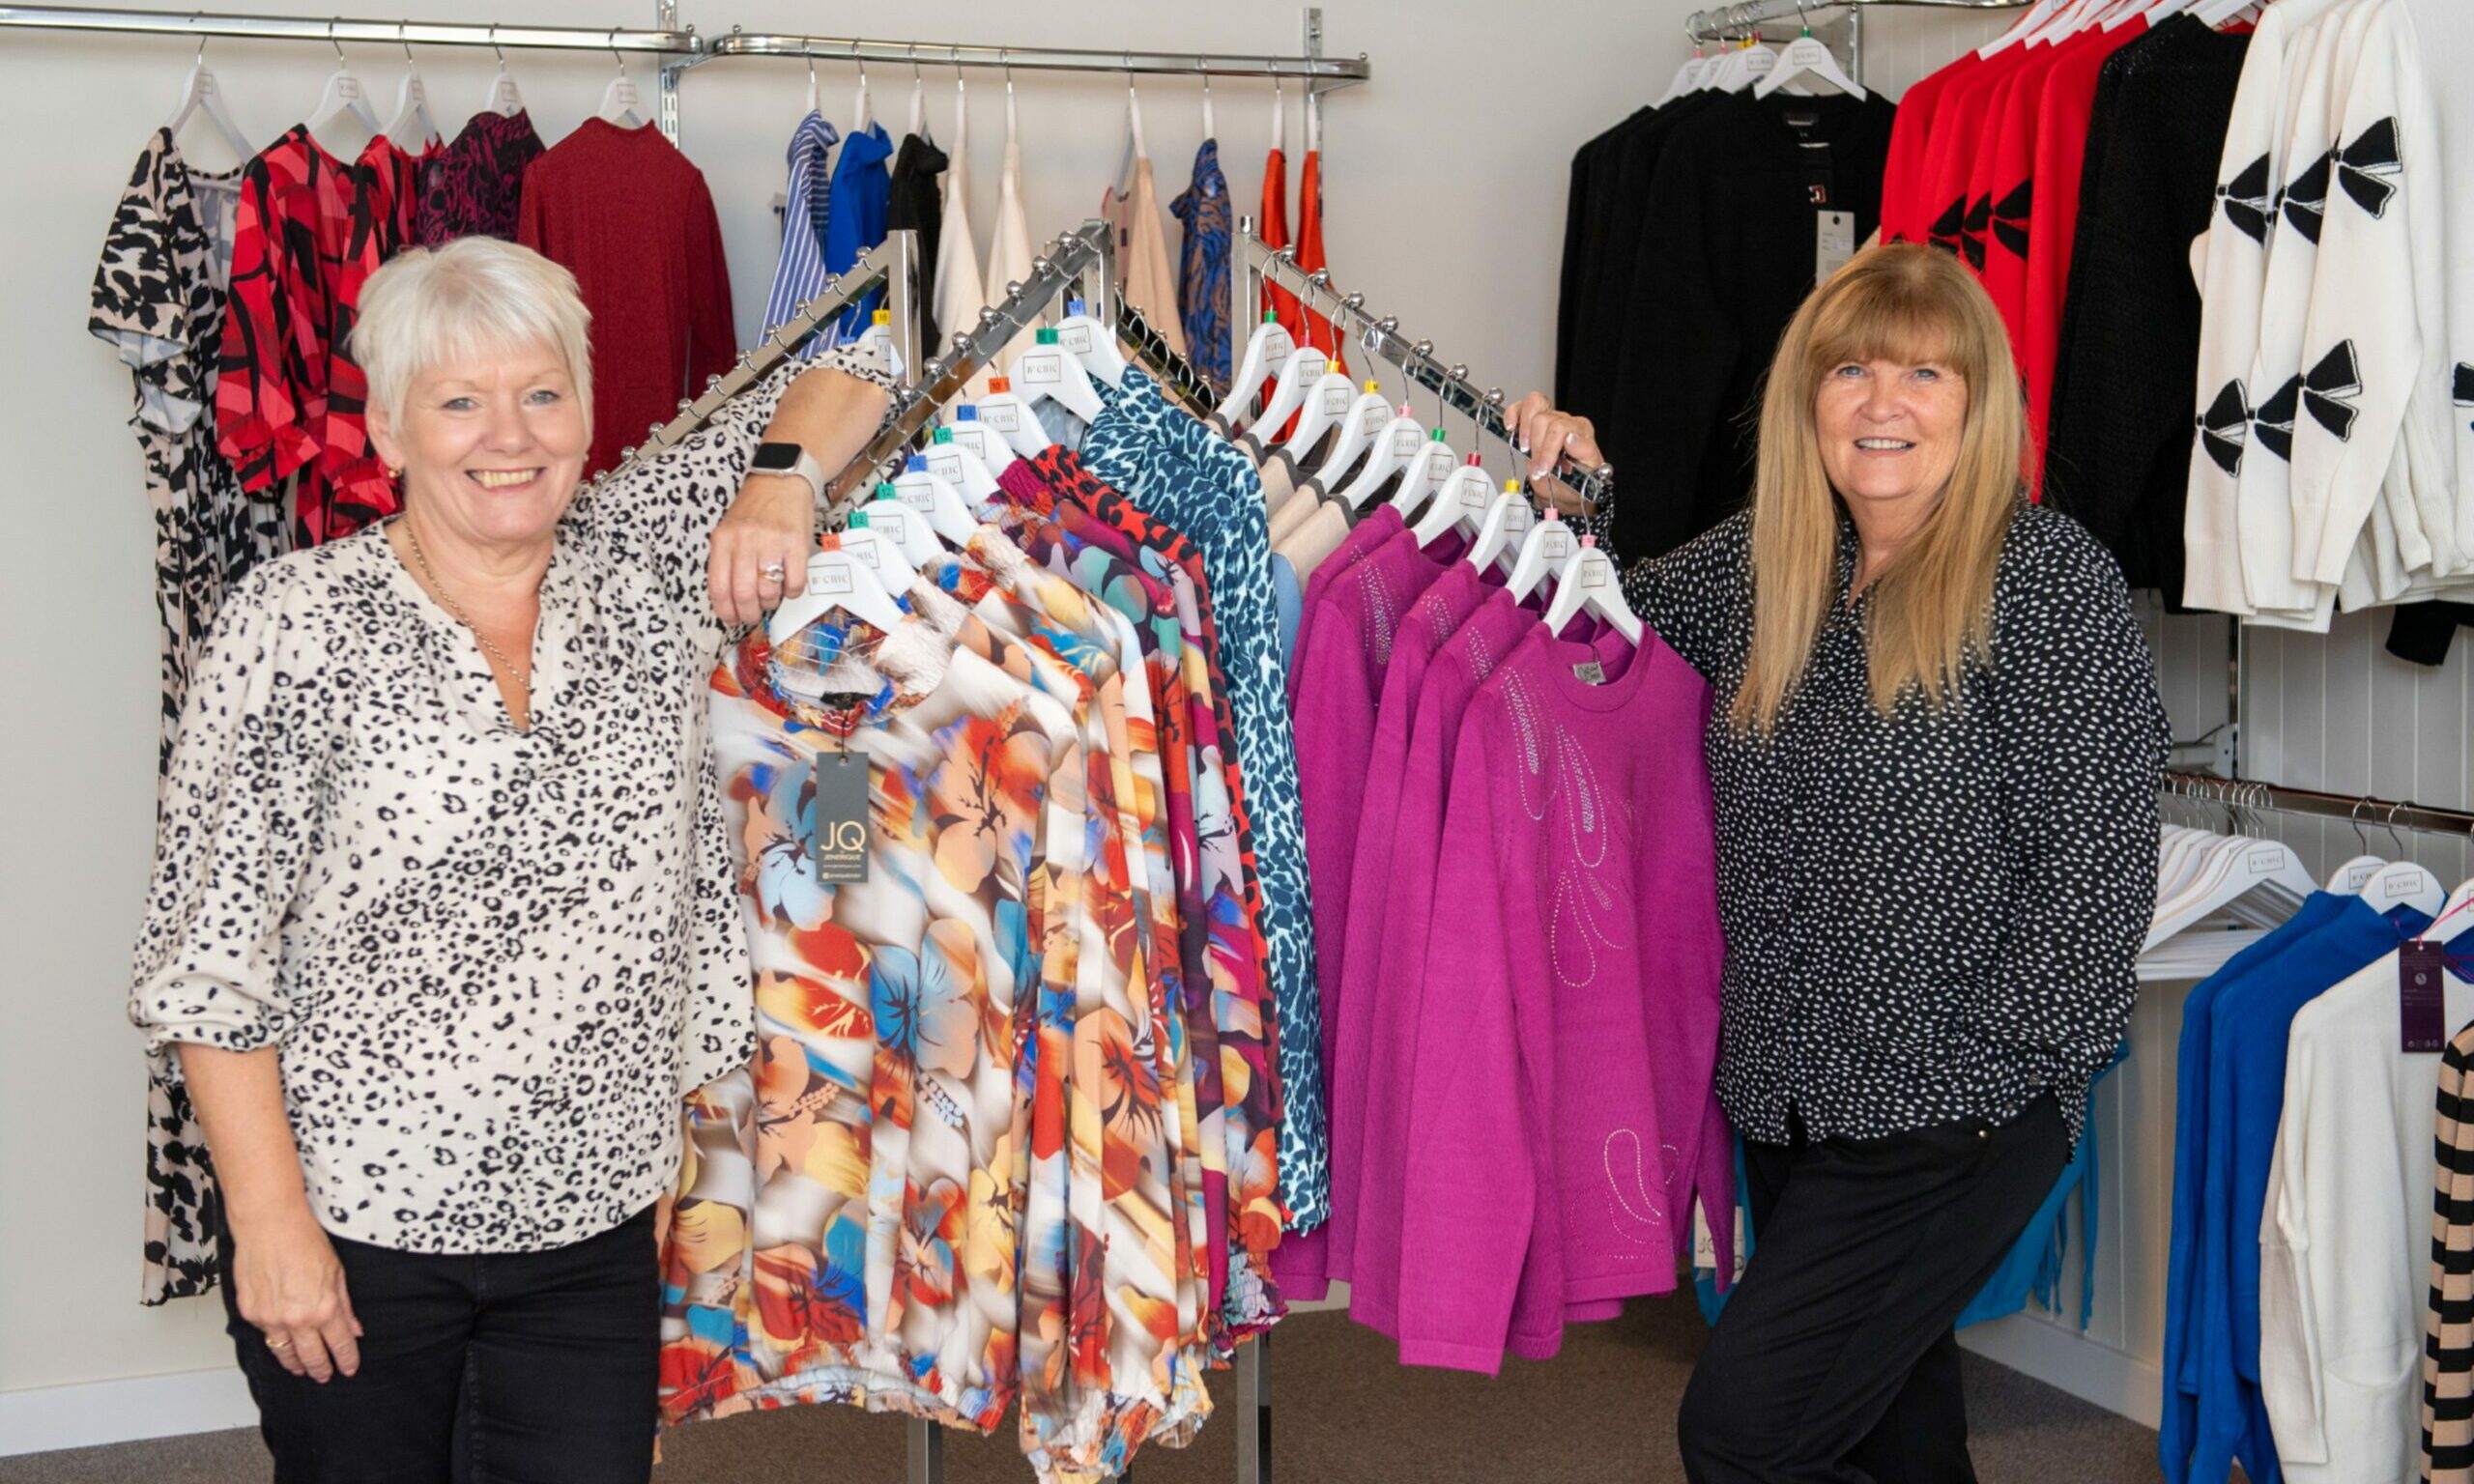 B' Chic: Ladies clothing store with plus sizes to open in Inverurie